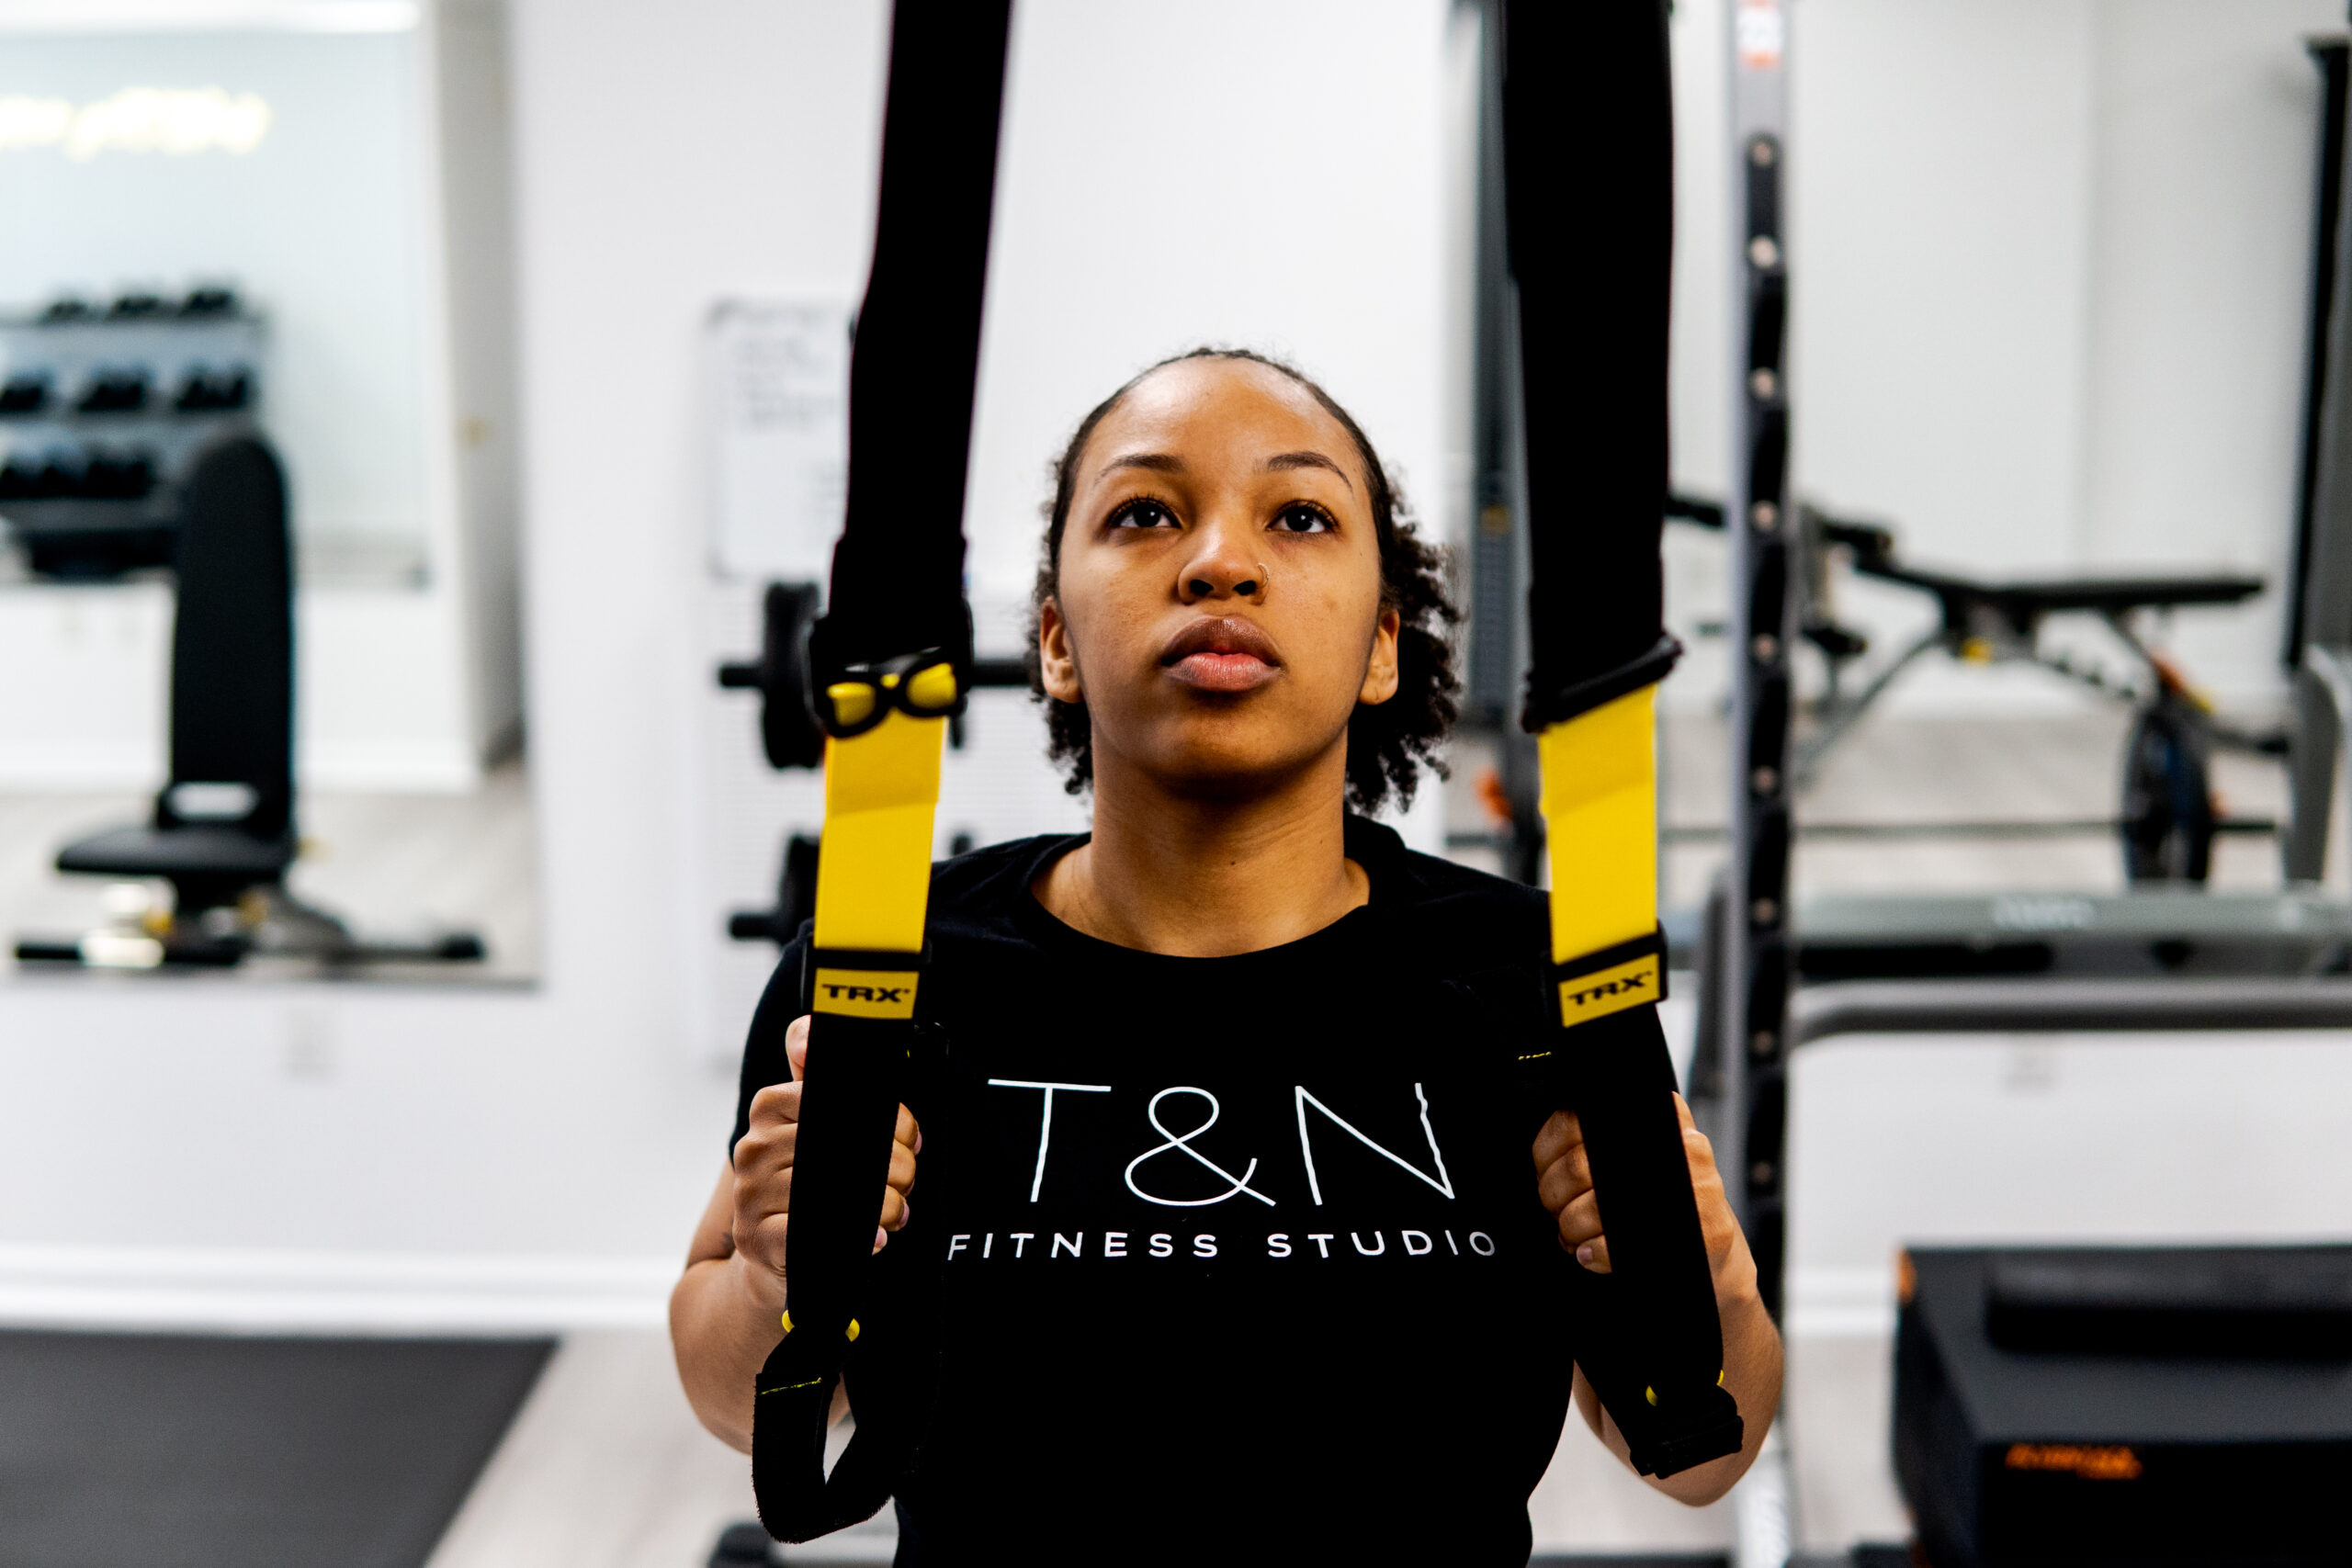 A woman intensifying her home workouts with a trx strap in a gym.